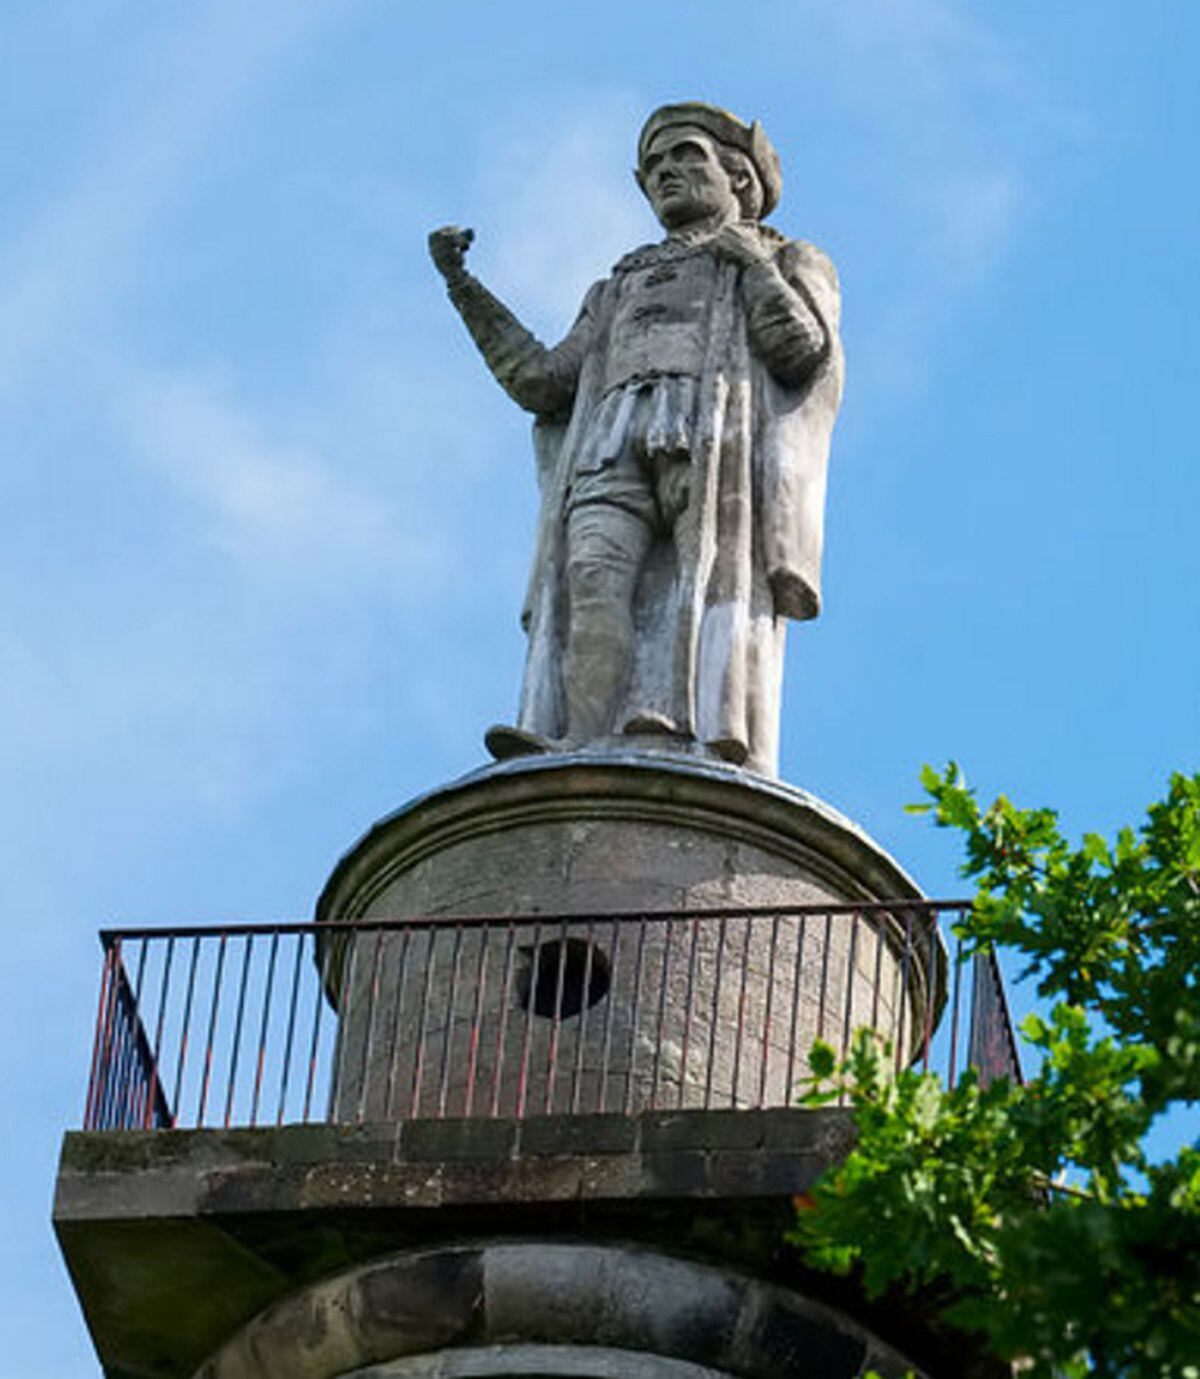 The statue of Rowland Hill, the first Protestant Lord Mayor of London, on top of the Monument at Hawkstone Park.